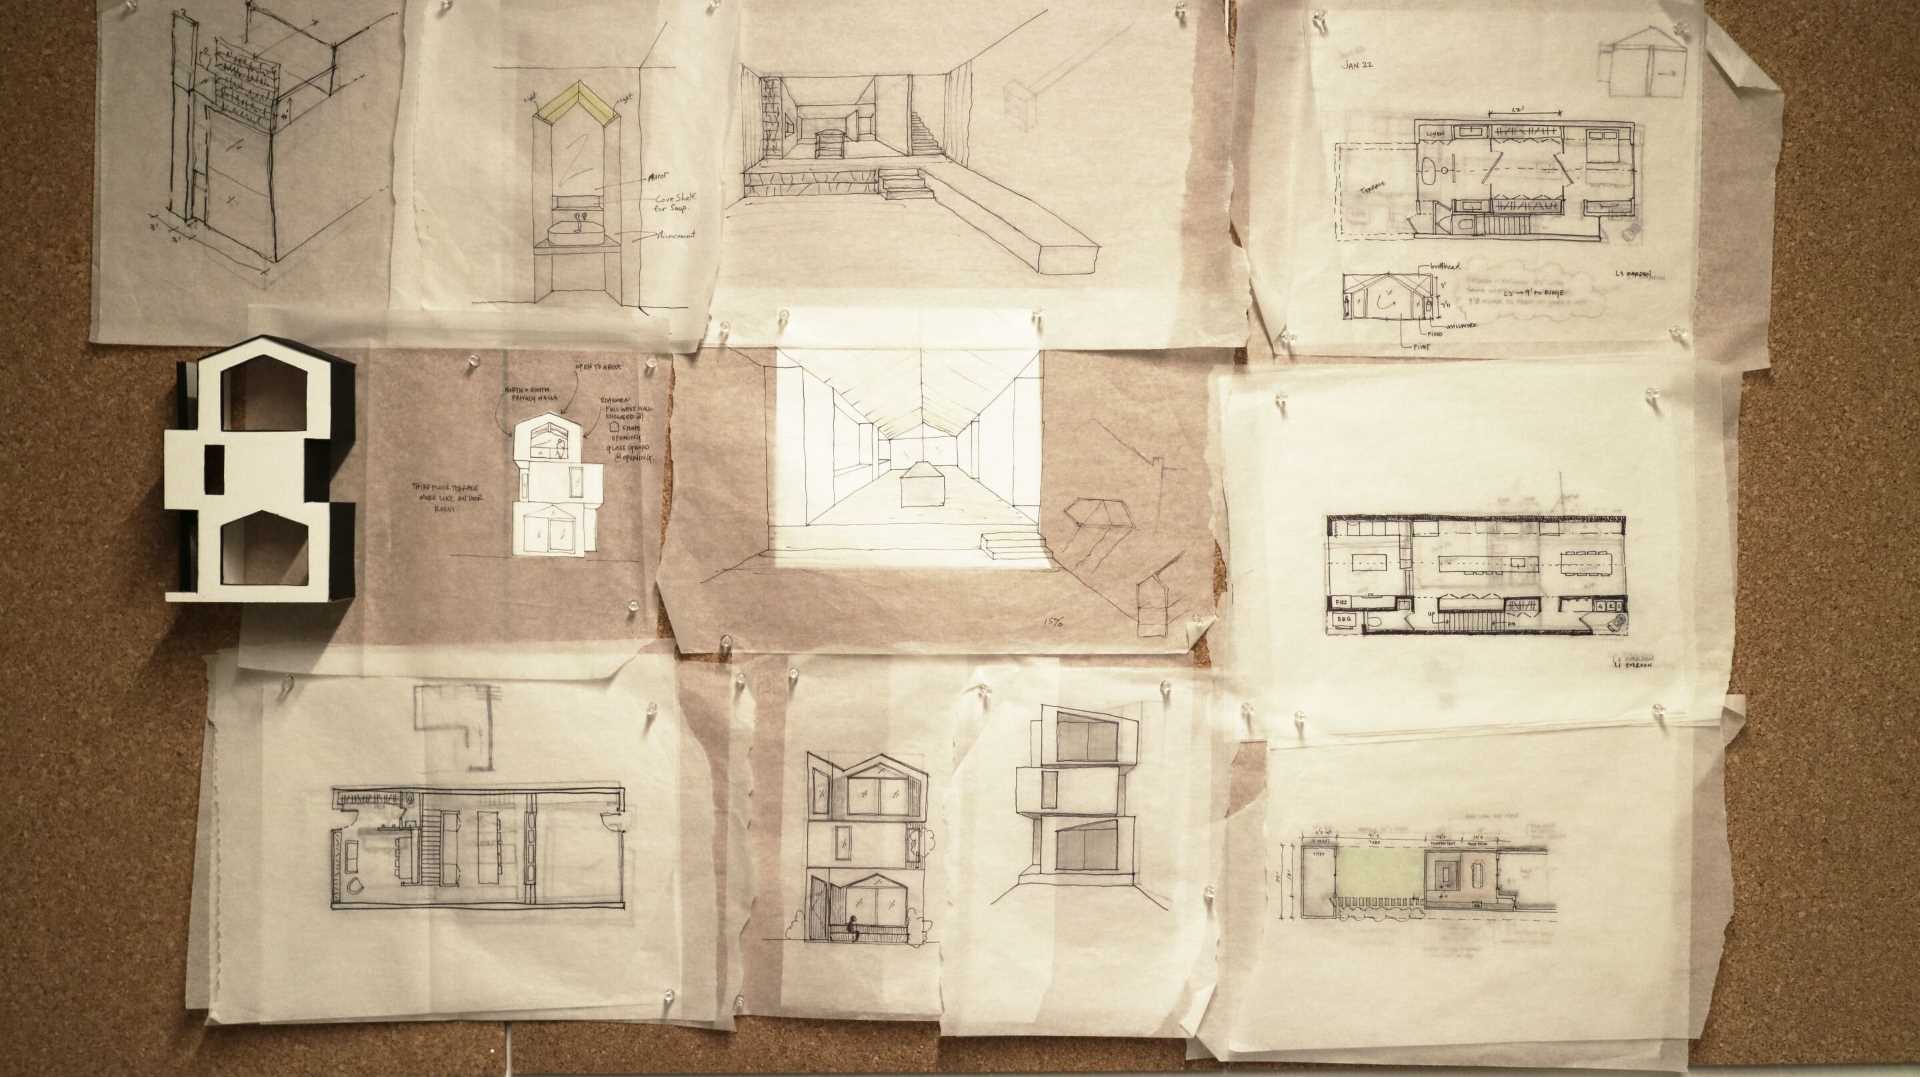 The architectural sketches for a modern ،me.